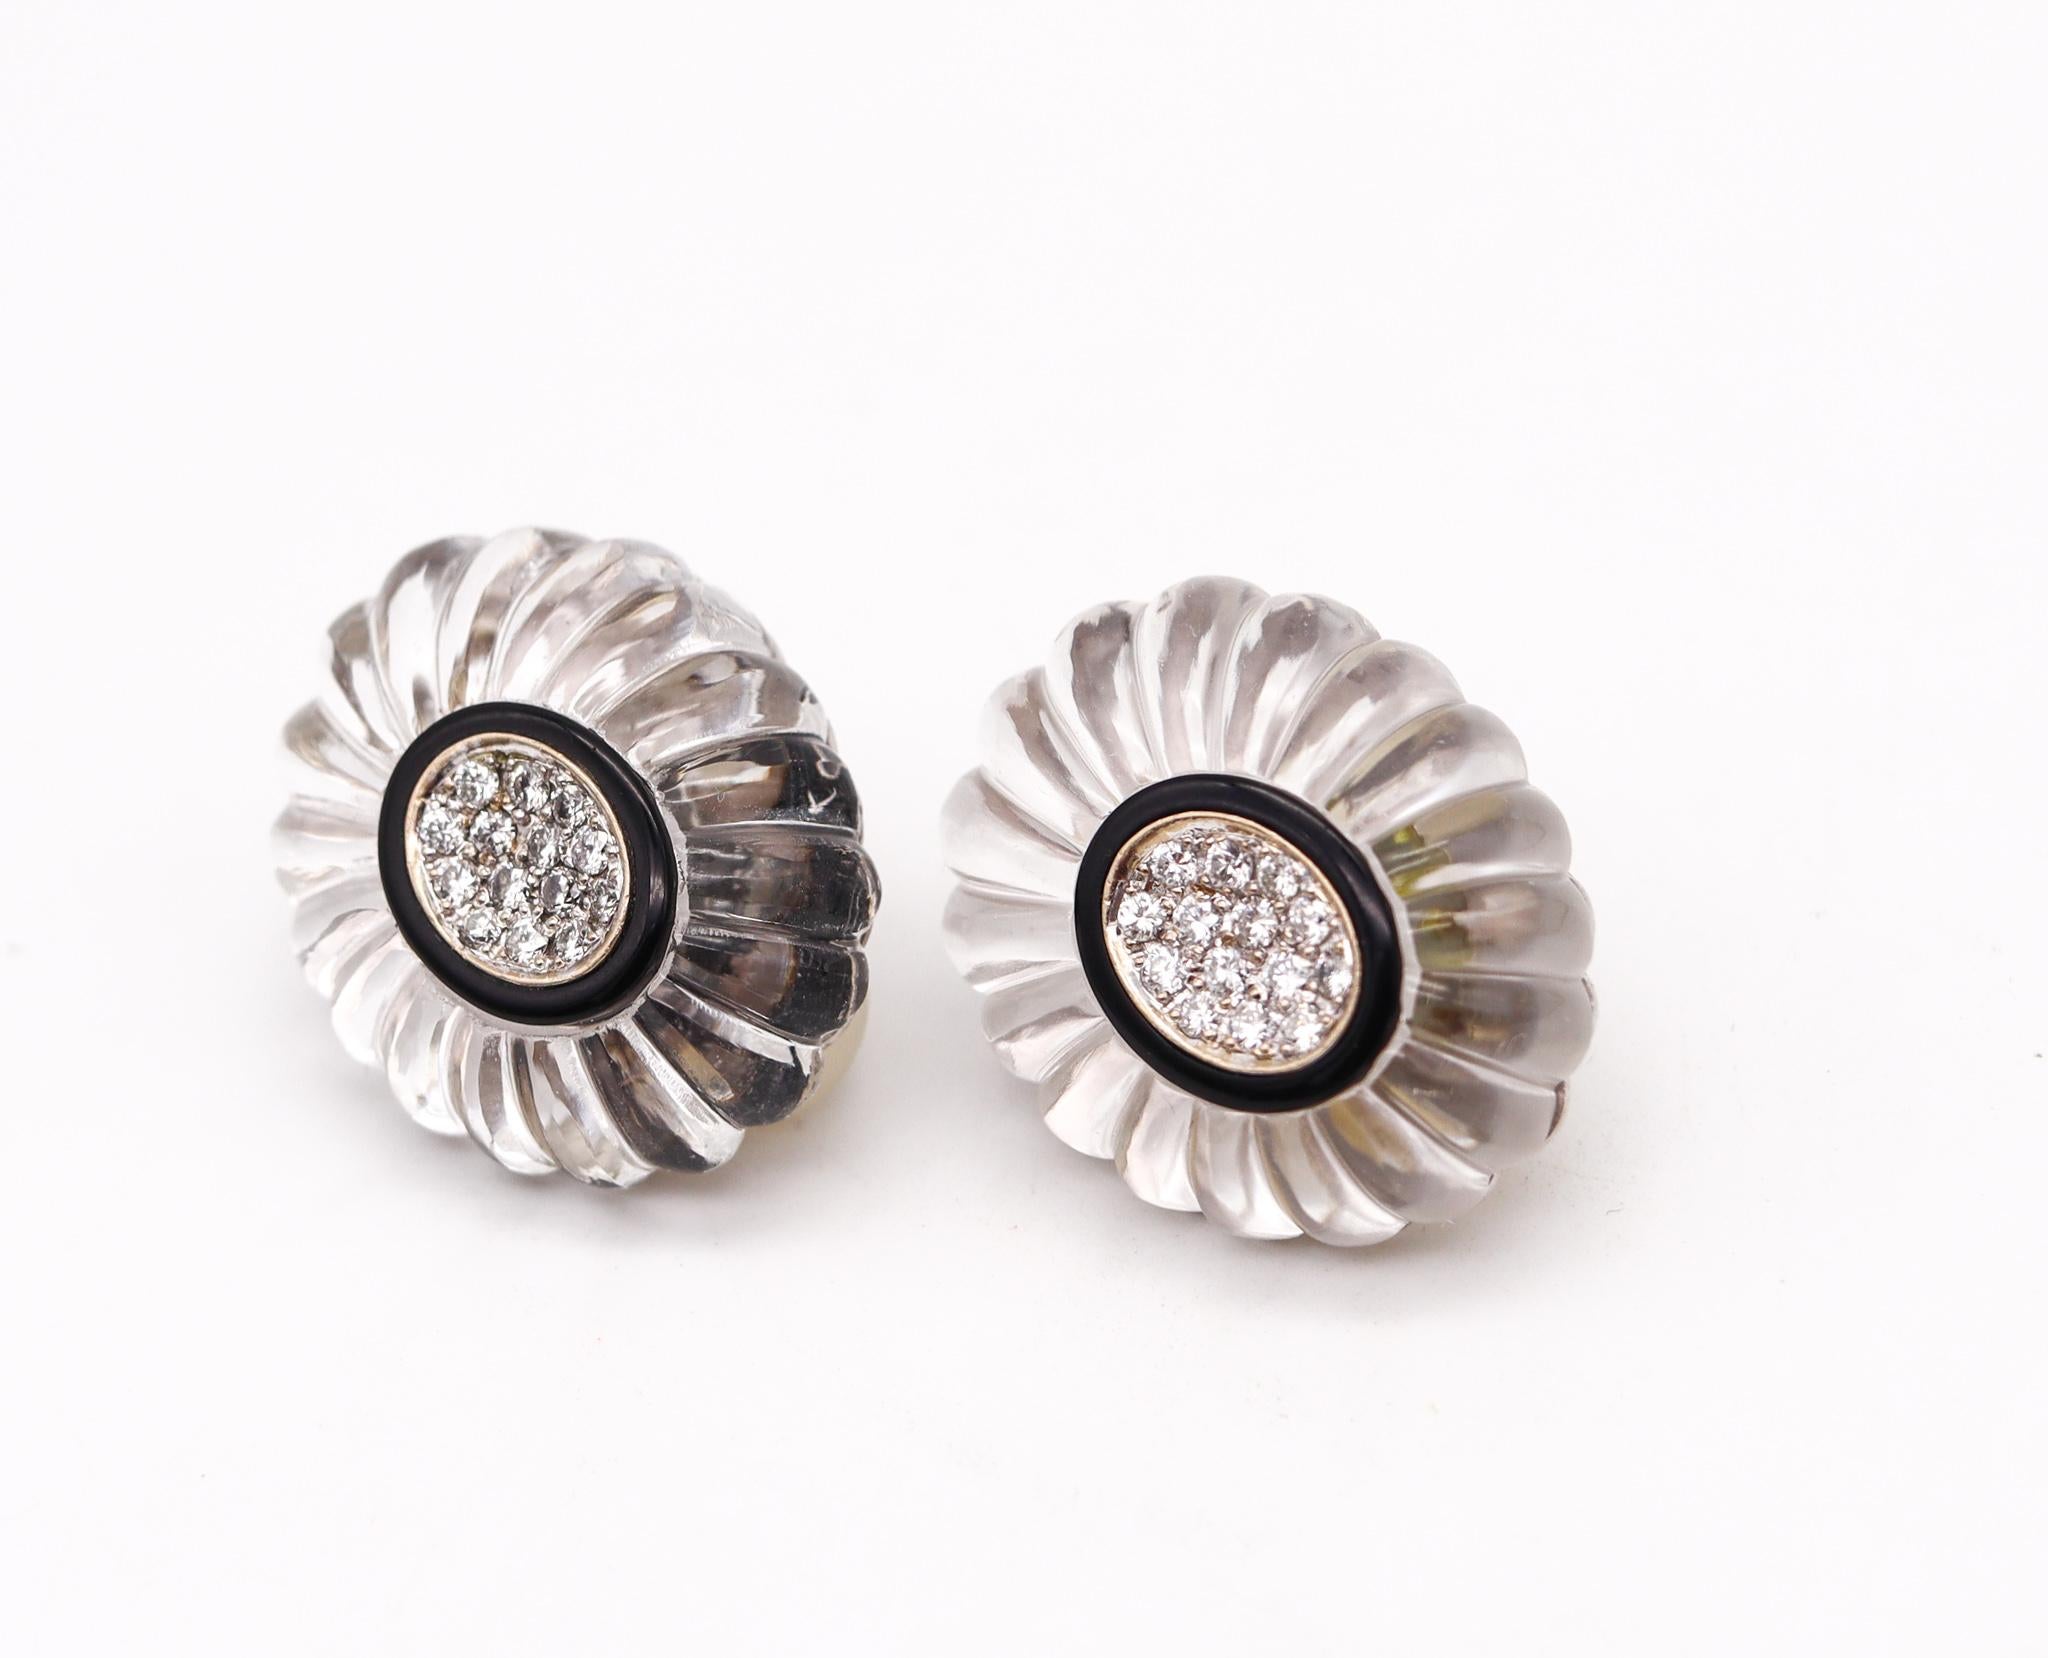 Cabochon Modernist 1970 Rock Quartz Clip-On Earrings in 18k Gold with 1.68ct Diamonds